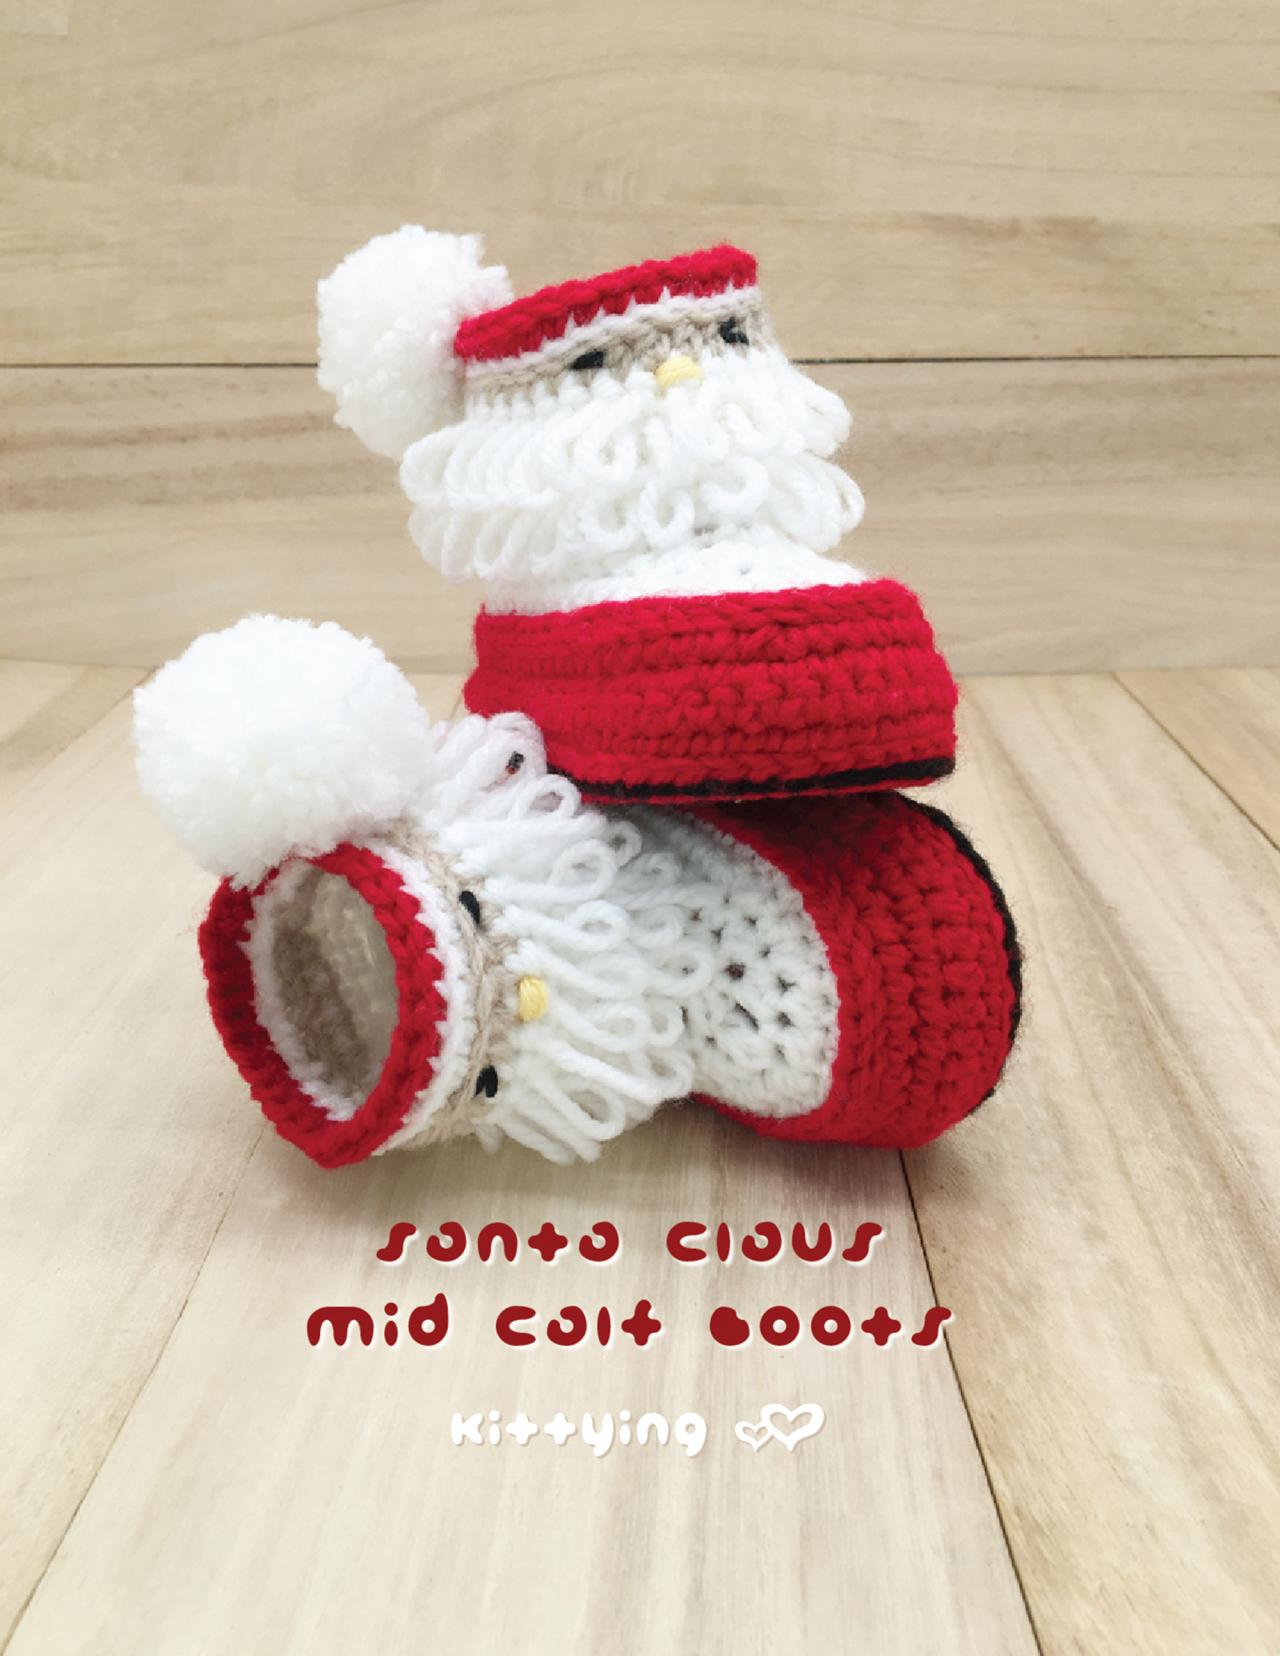 Baby Booties Crochet Patterns - Santa Claus Mid Calf Boots Crochet PATTERN for Christmas Holiday by Kittying - Newborn Baby Toddler